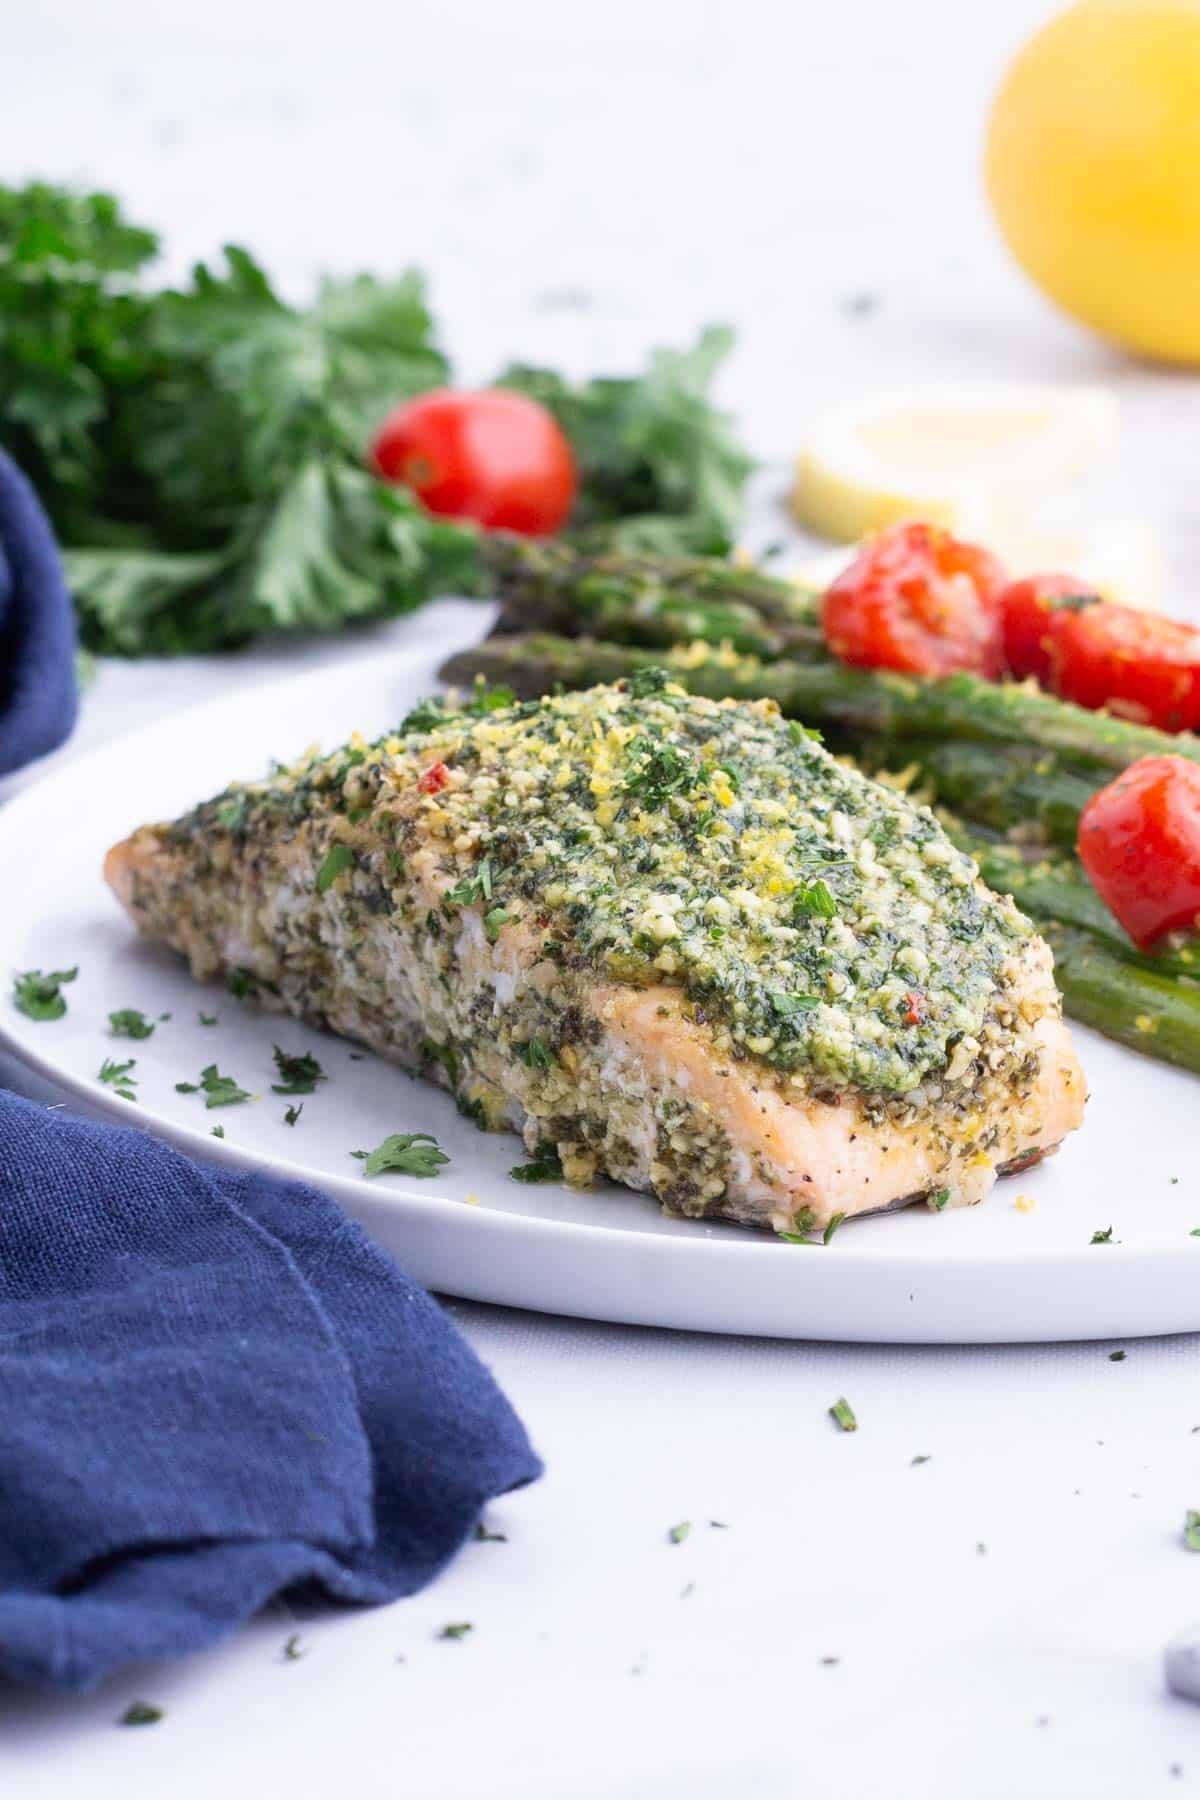 Pesto salmon is served on a plate with asparagus and tomatoes.